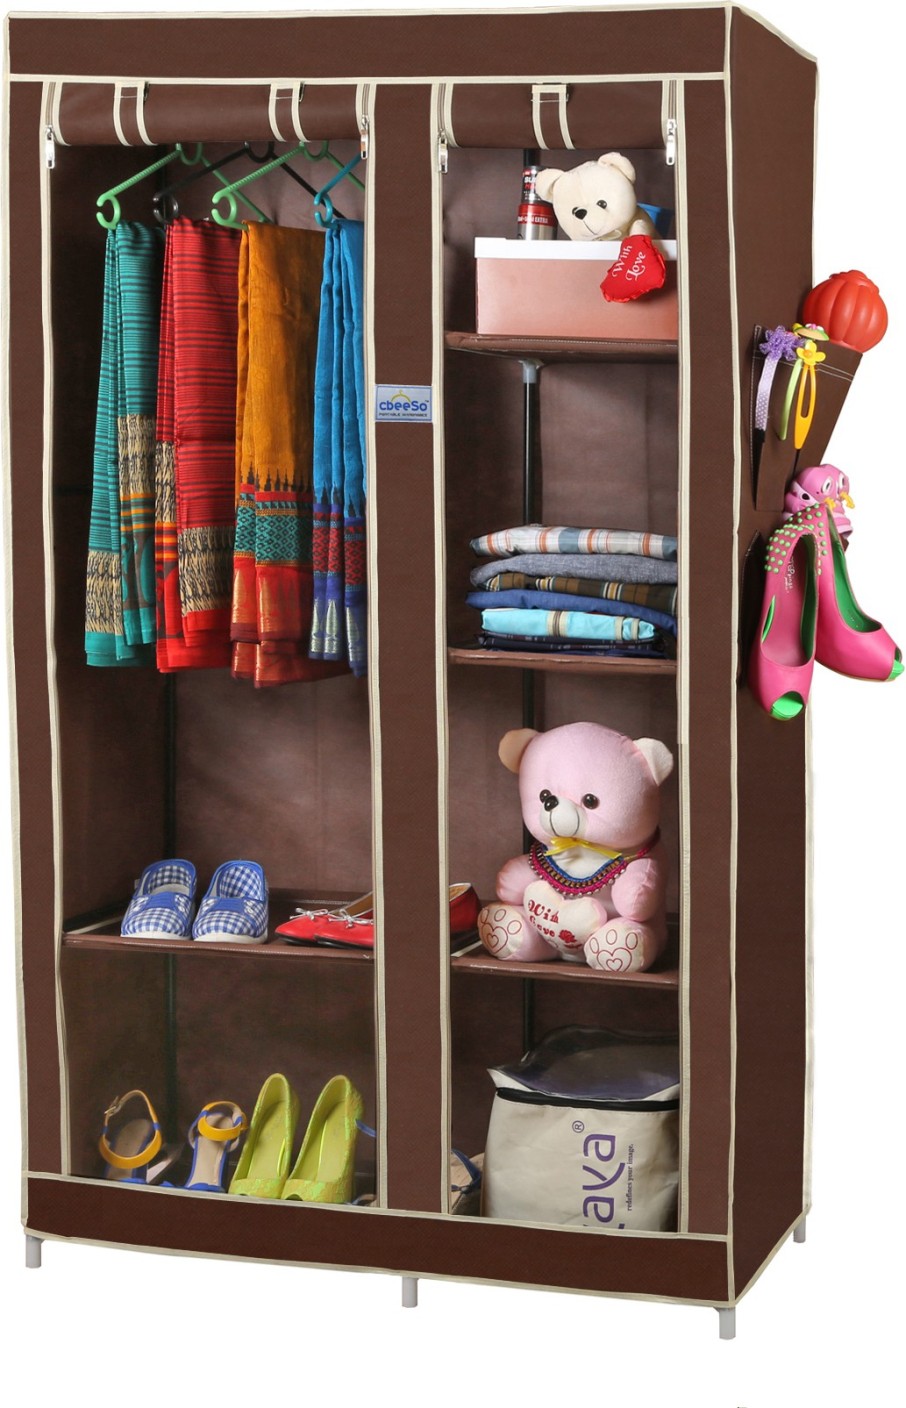 CbeeSo Stainless Steel Collapsible  Wardrobe  Price in India 